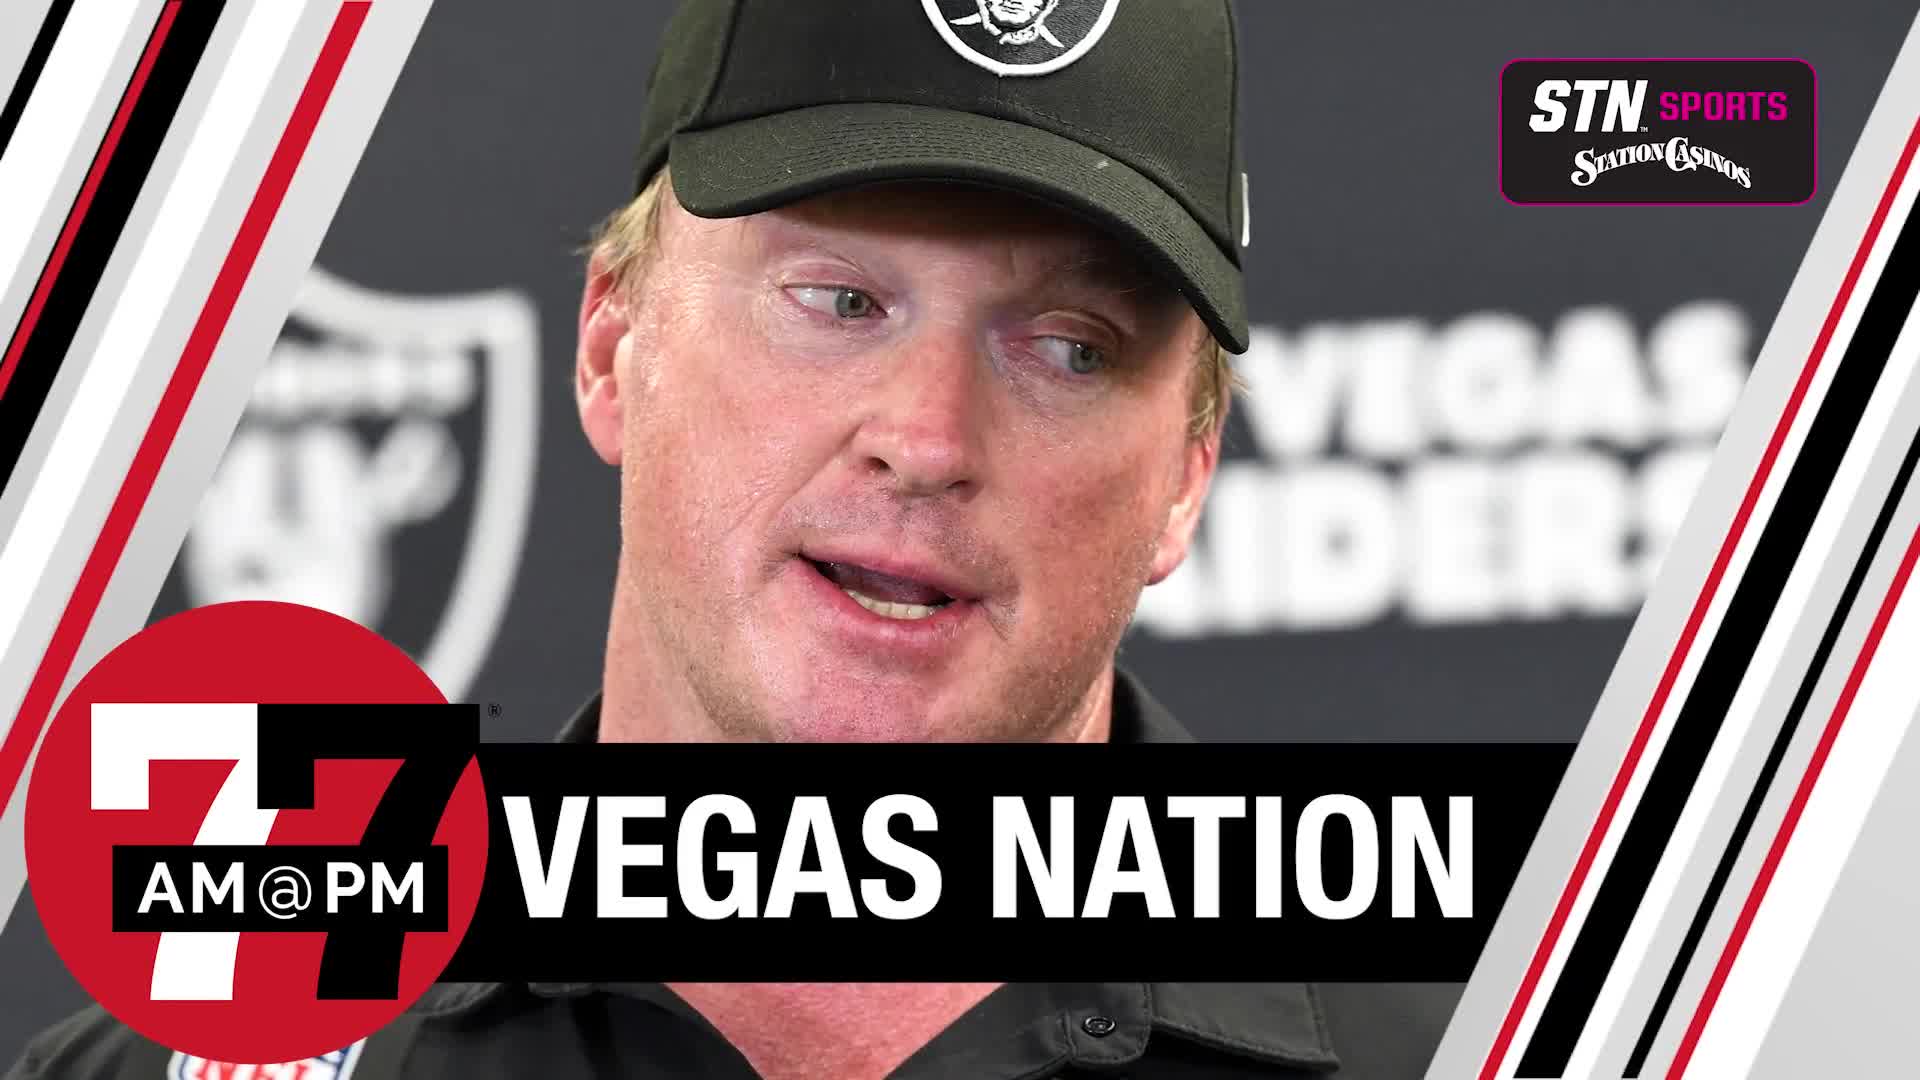 Gruden loses appeal in court case